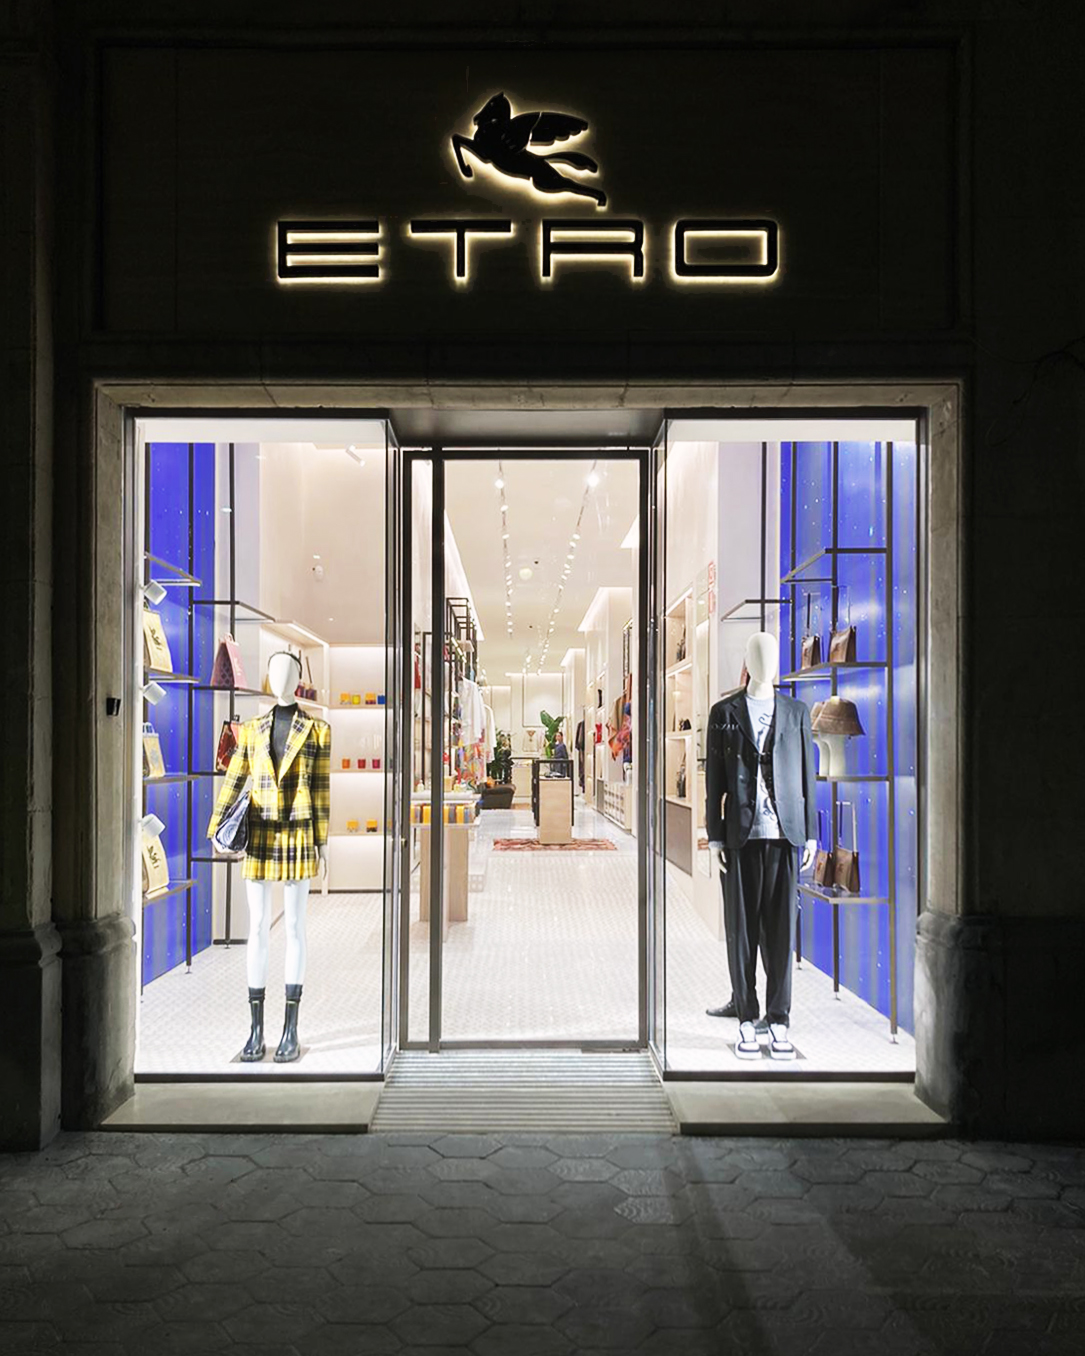 ETRO (@EtroOfficial) / Twitter